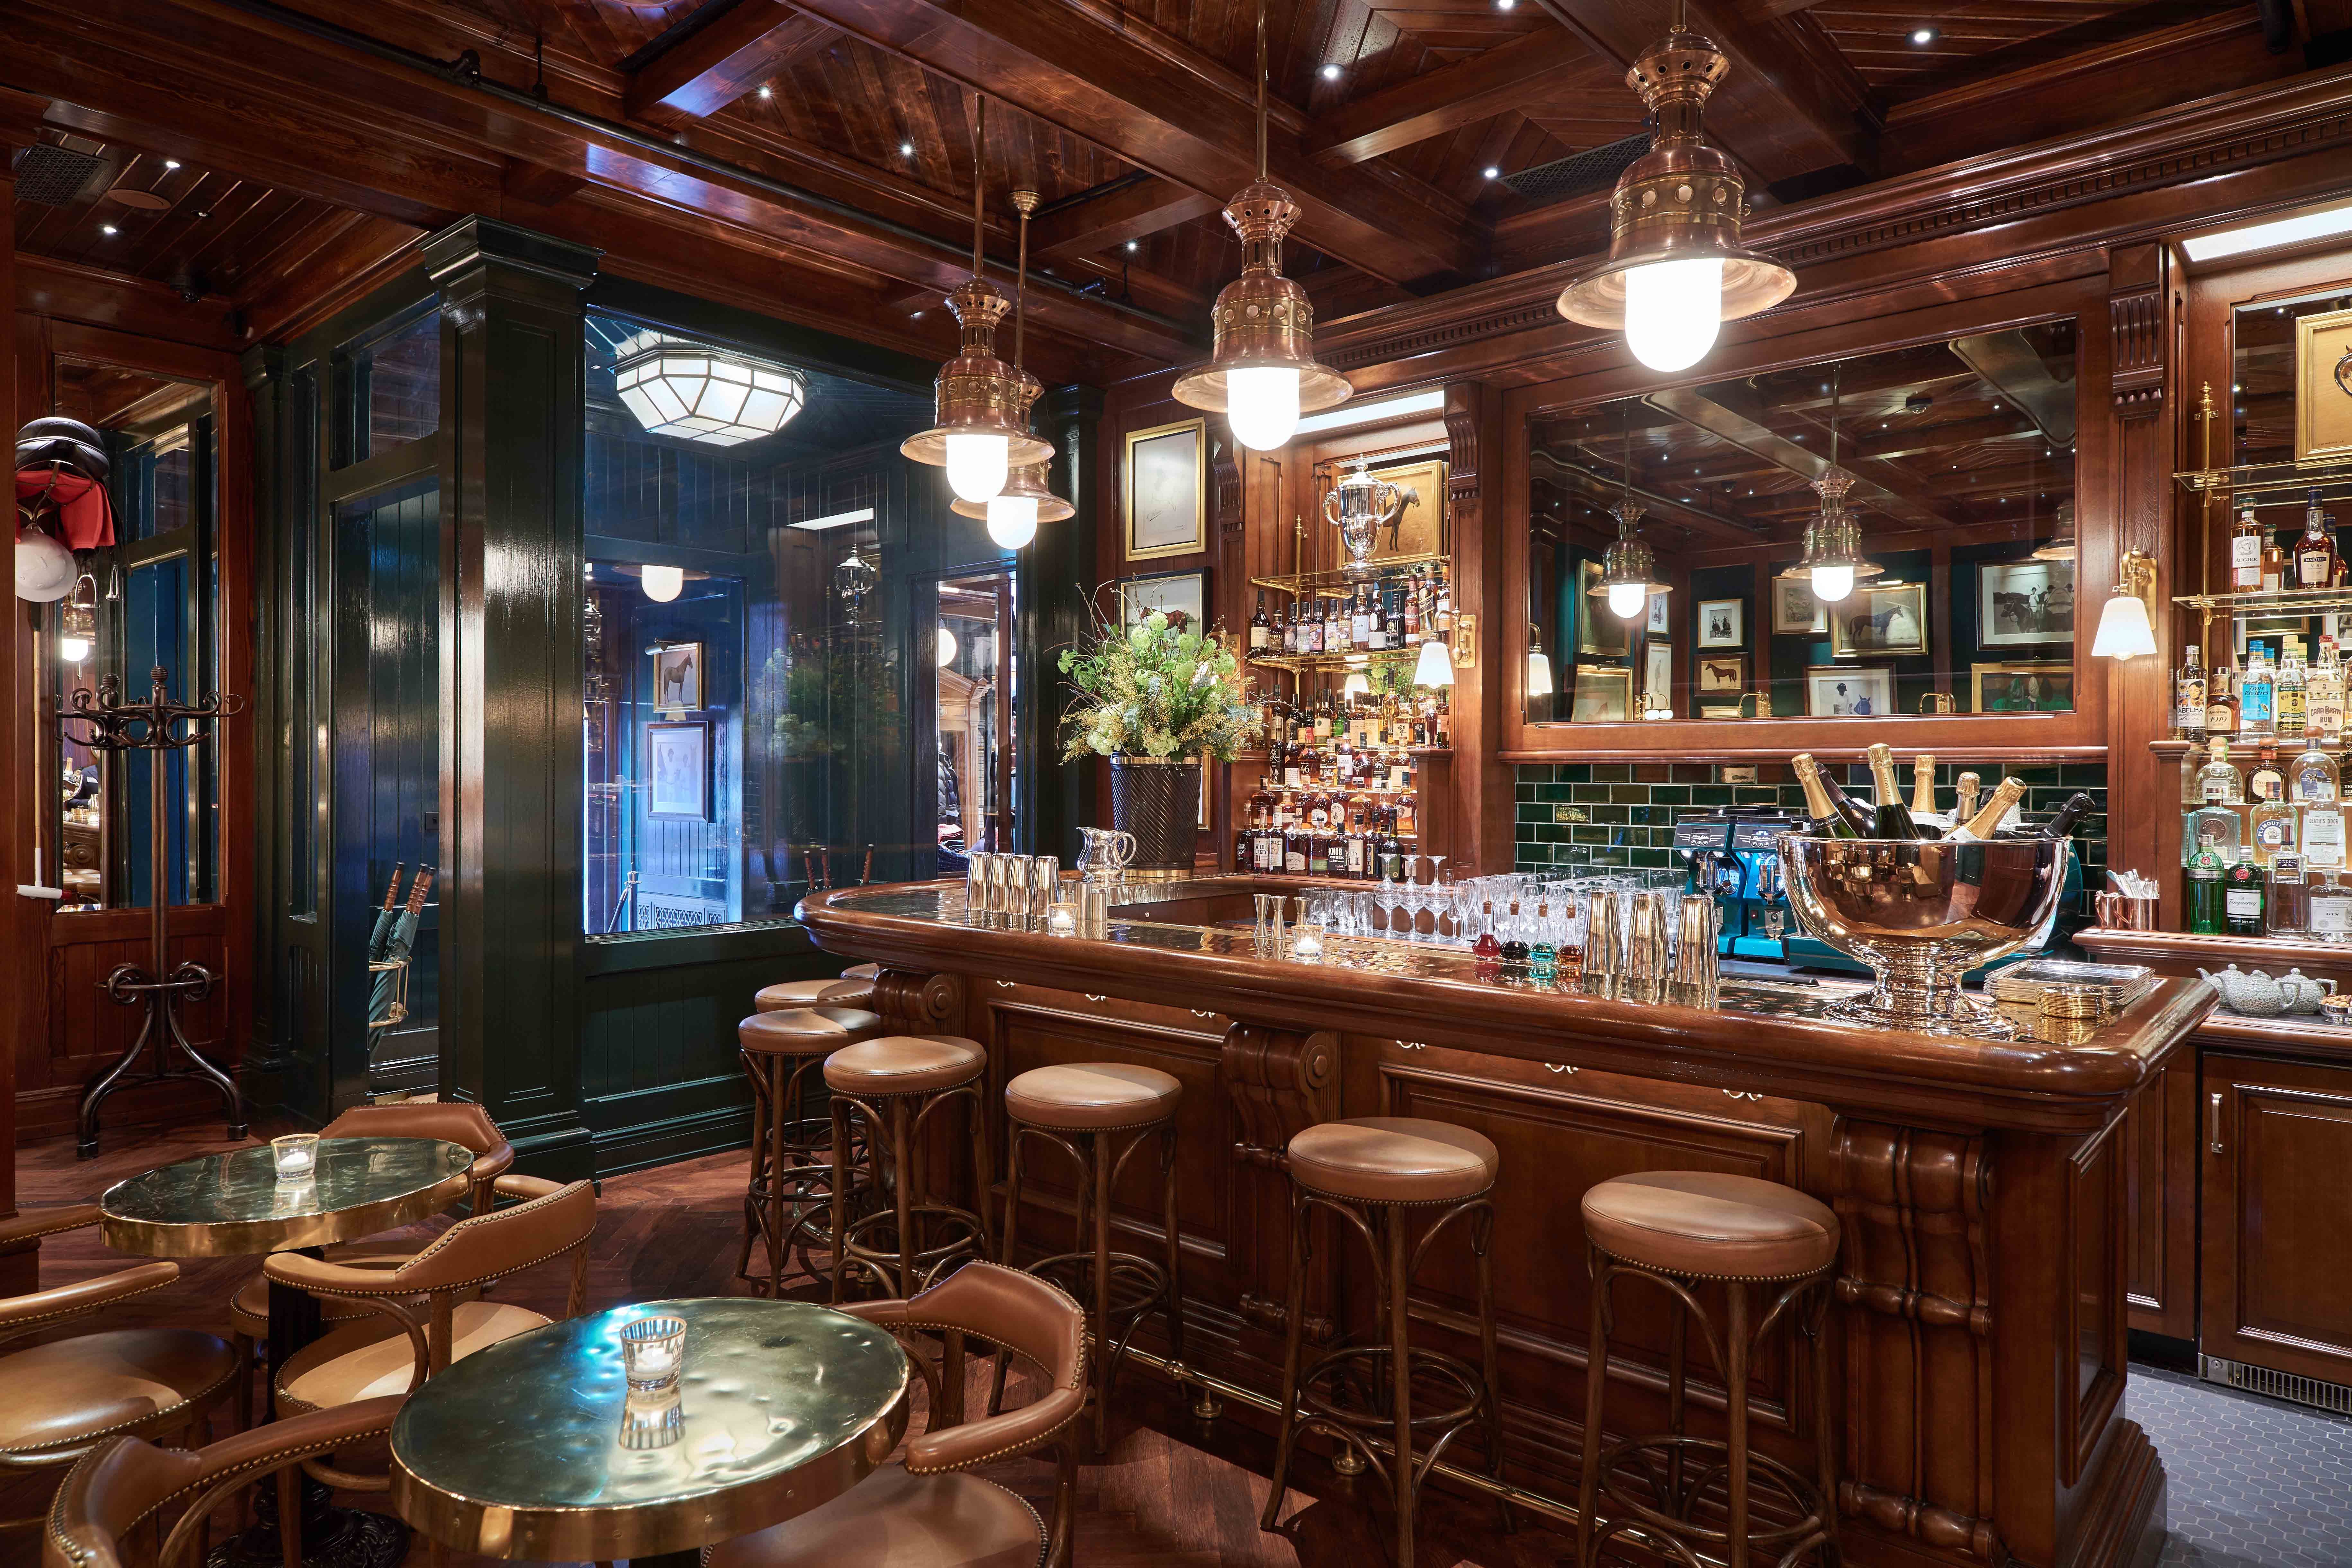 The Polo Bar Is Ralph Lauren's First NY Restaurant